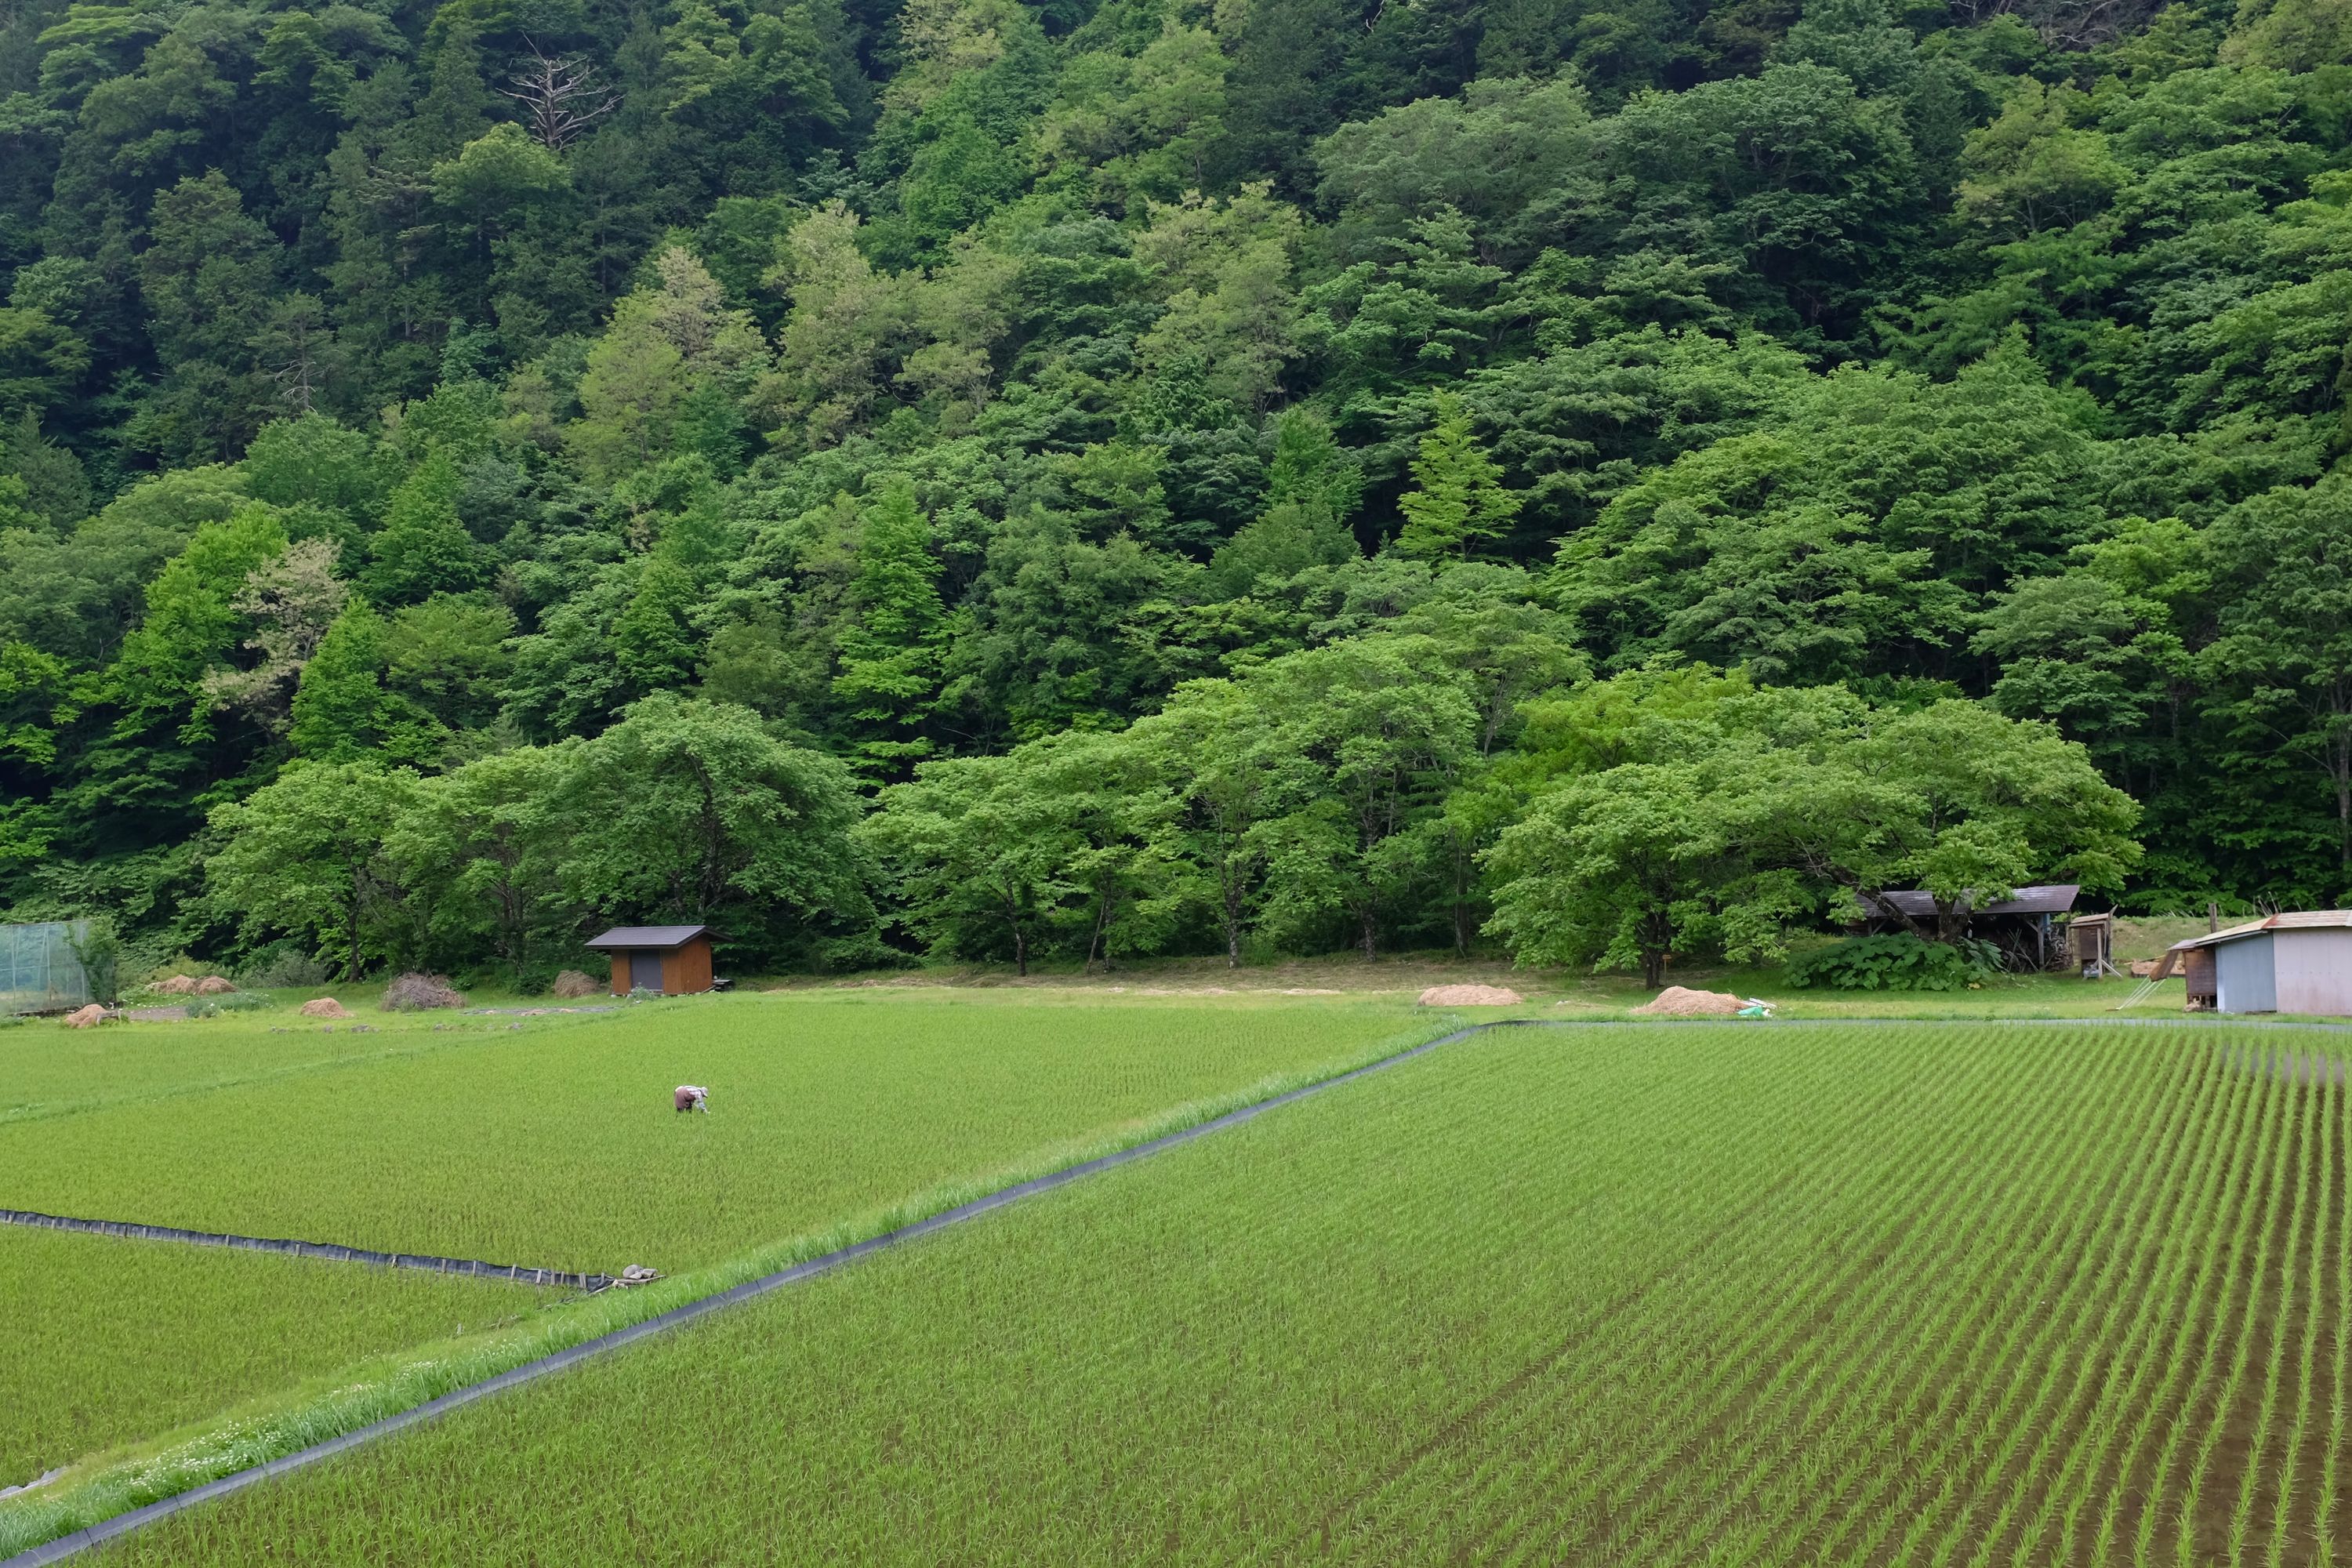 A woman in the distance works in a rice field against a forested hillside.